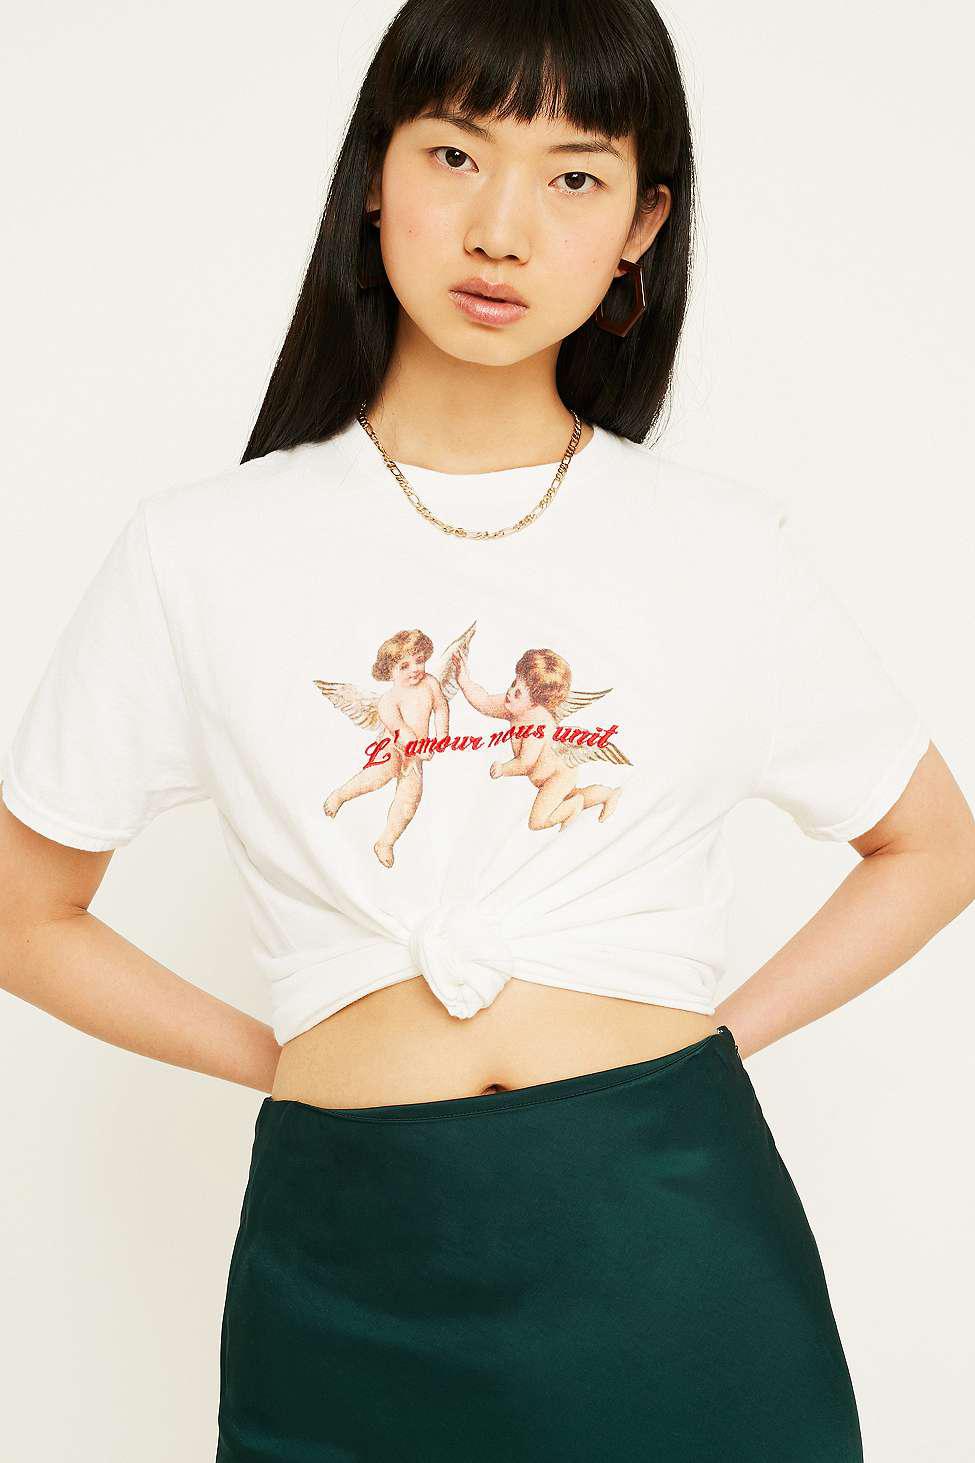 angel shirt urban outfitters